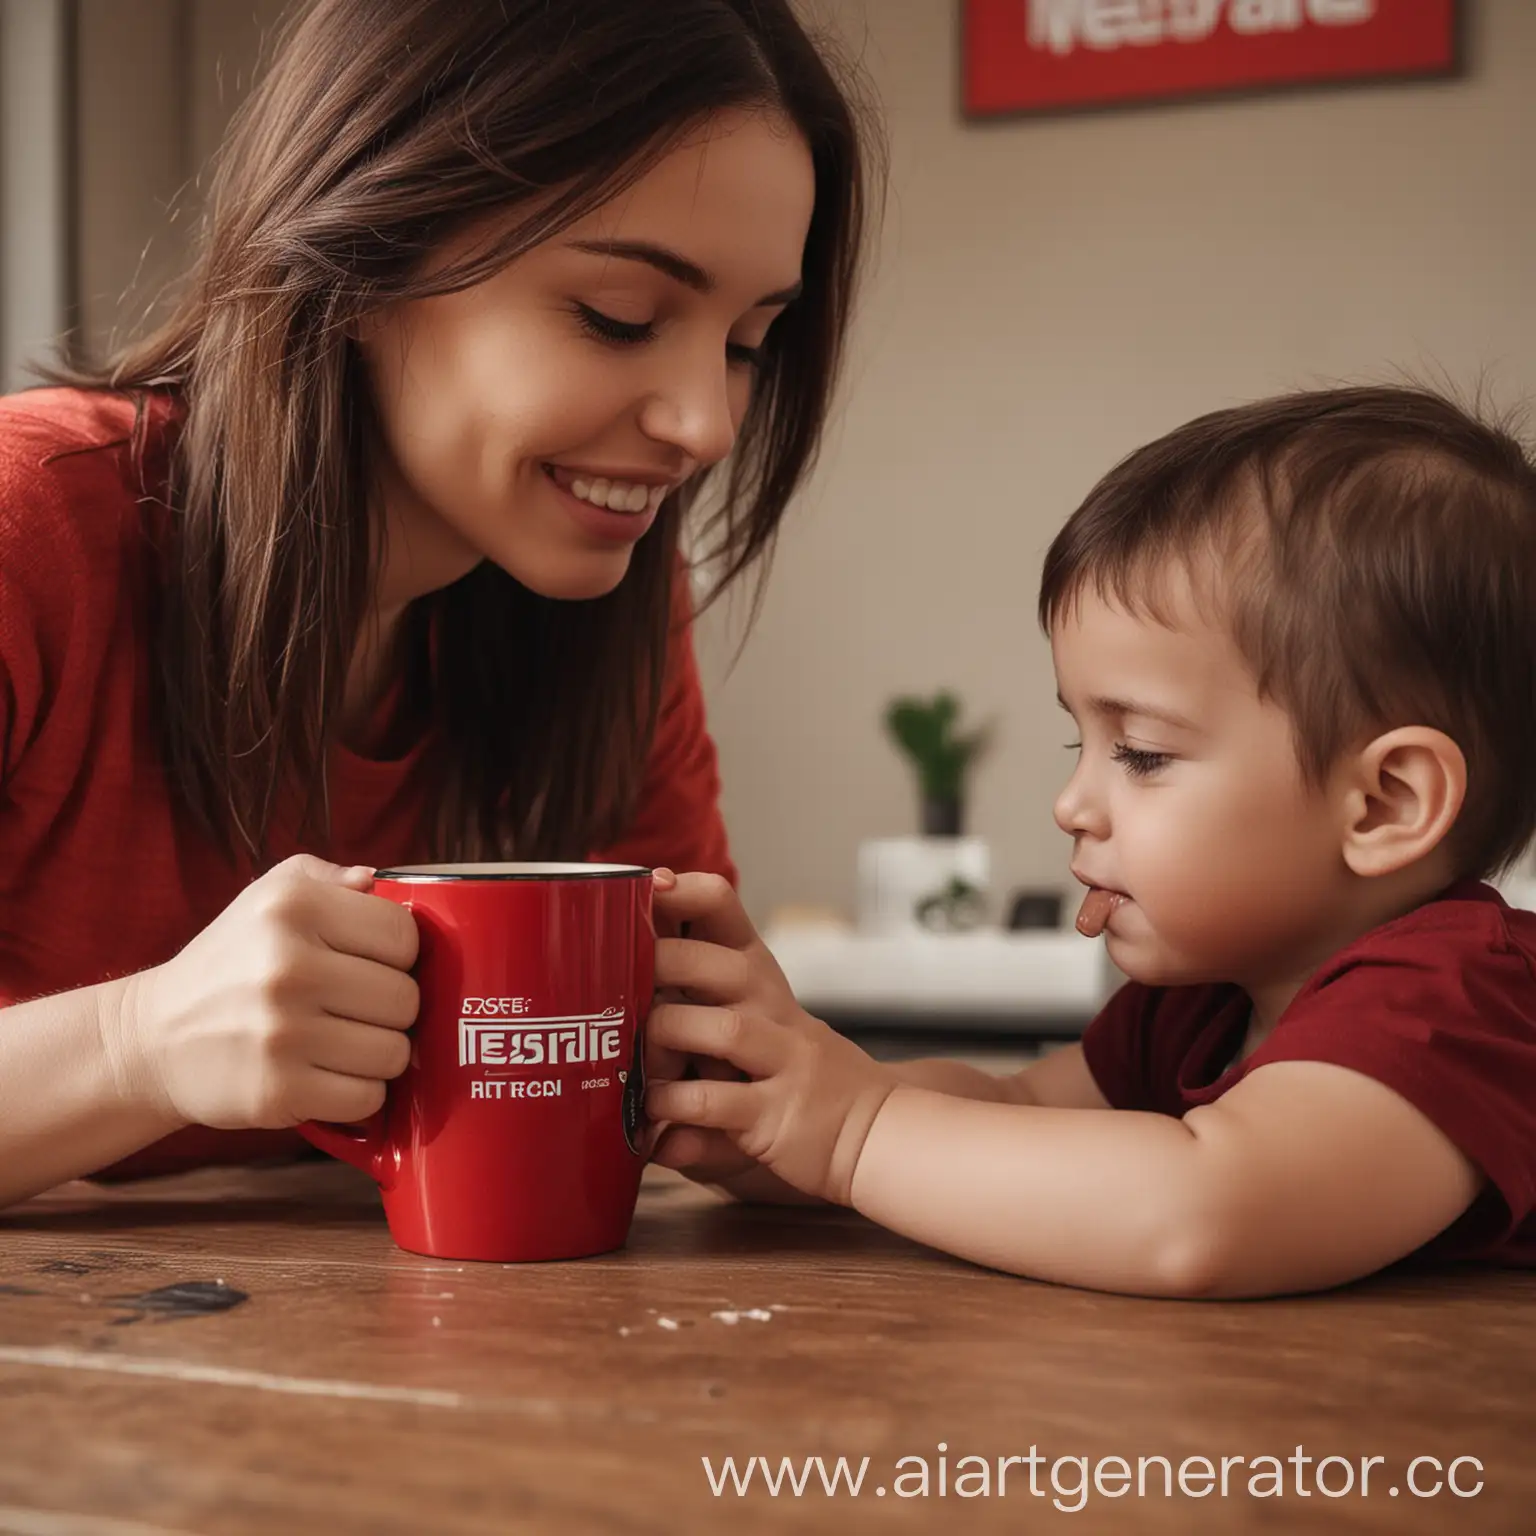 Young-Mom-Playing-with-Child-with-Nescafe-Cup-in-Earthy-Tones